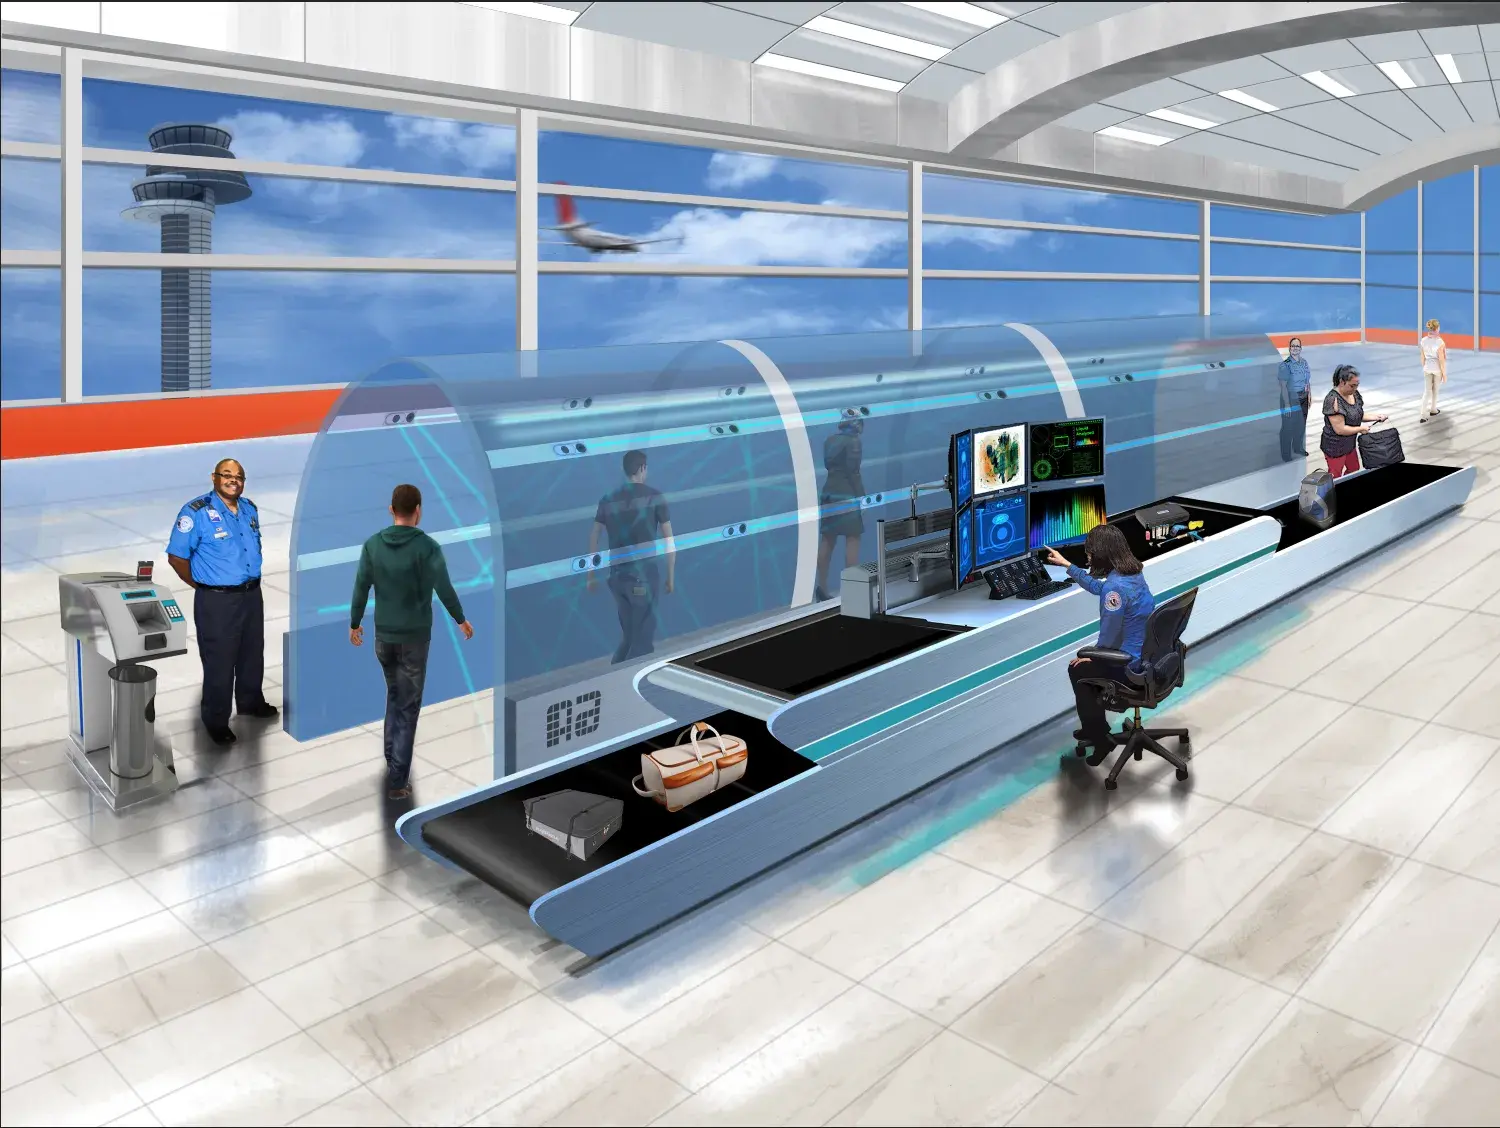 Graphic rendition of airport check point in the future.